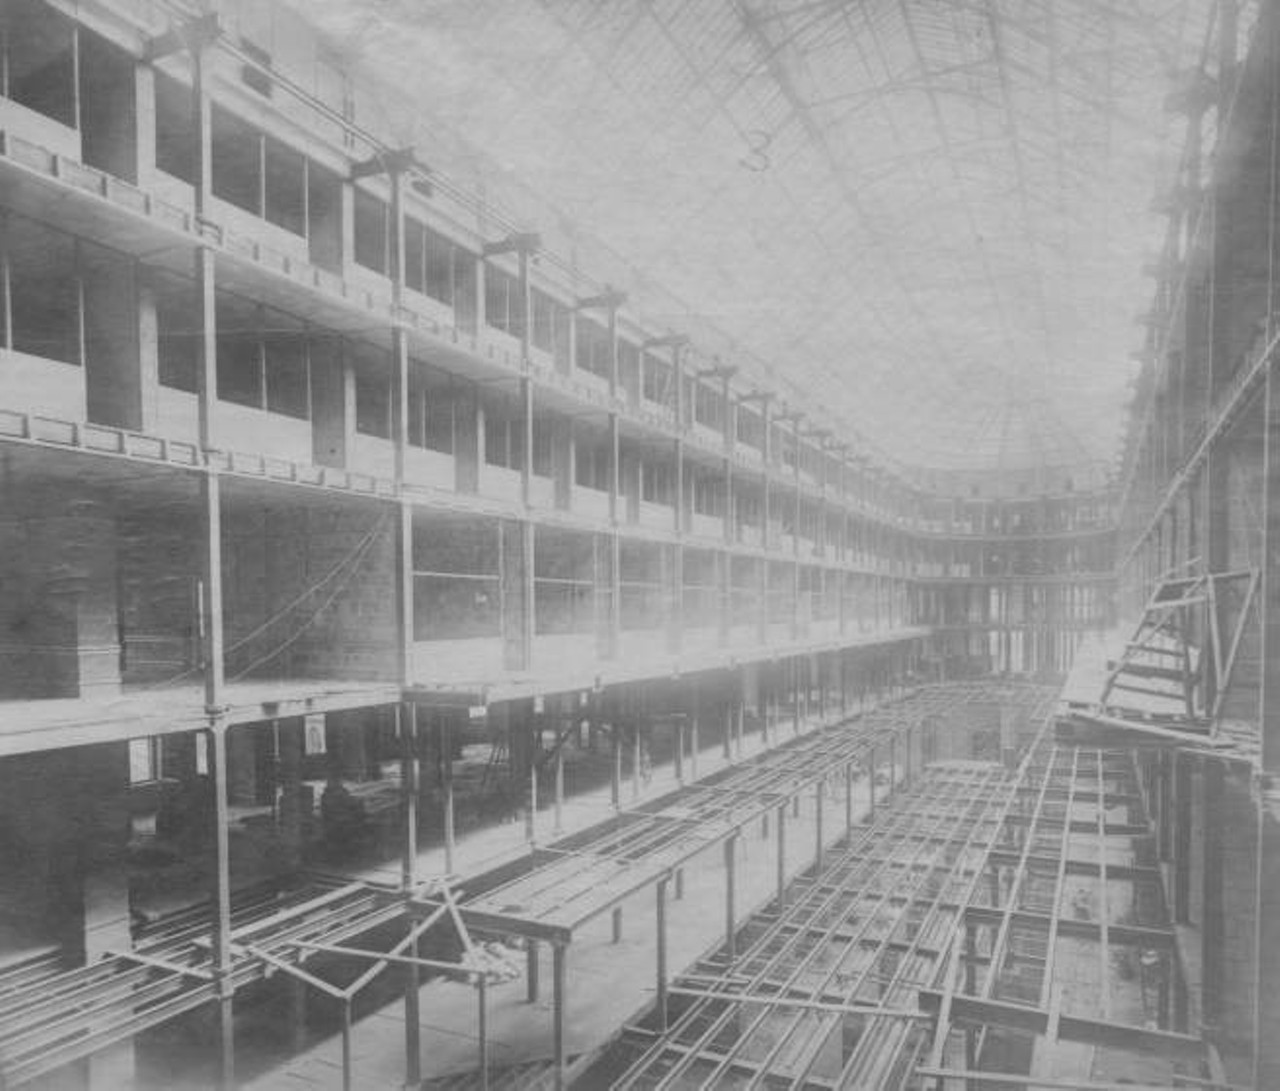 Looking from the Euclid Avenue side toward the Superior Avenue side during construction. Designed by Architects George H. Smith and John Eisenmann, the Arcade opened in 1890. c. 1899